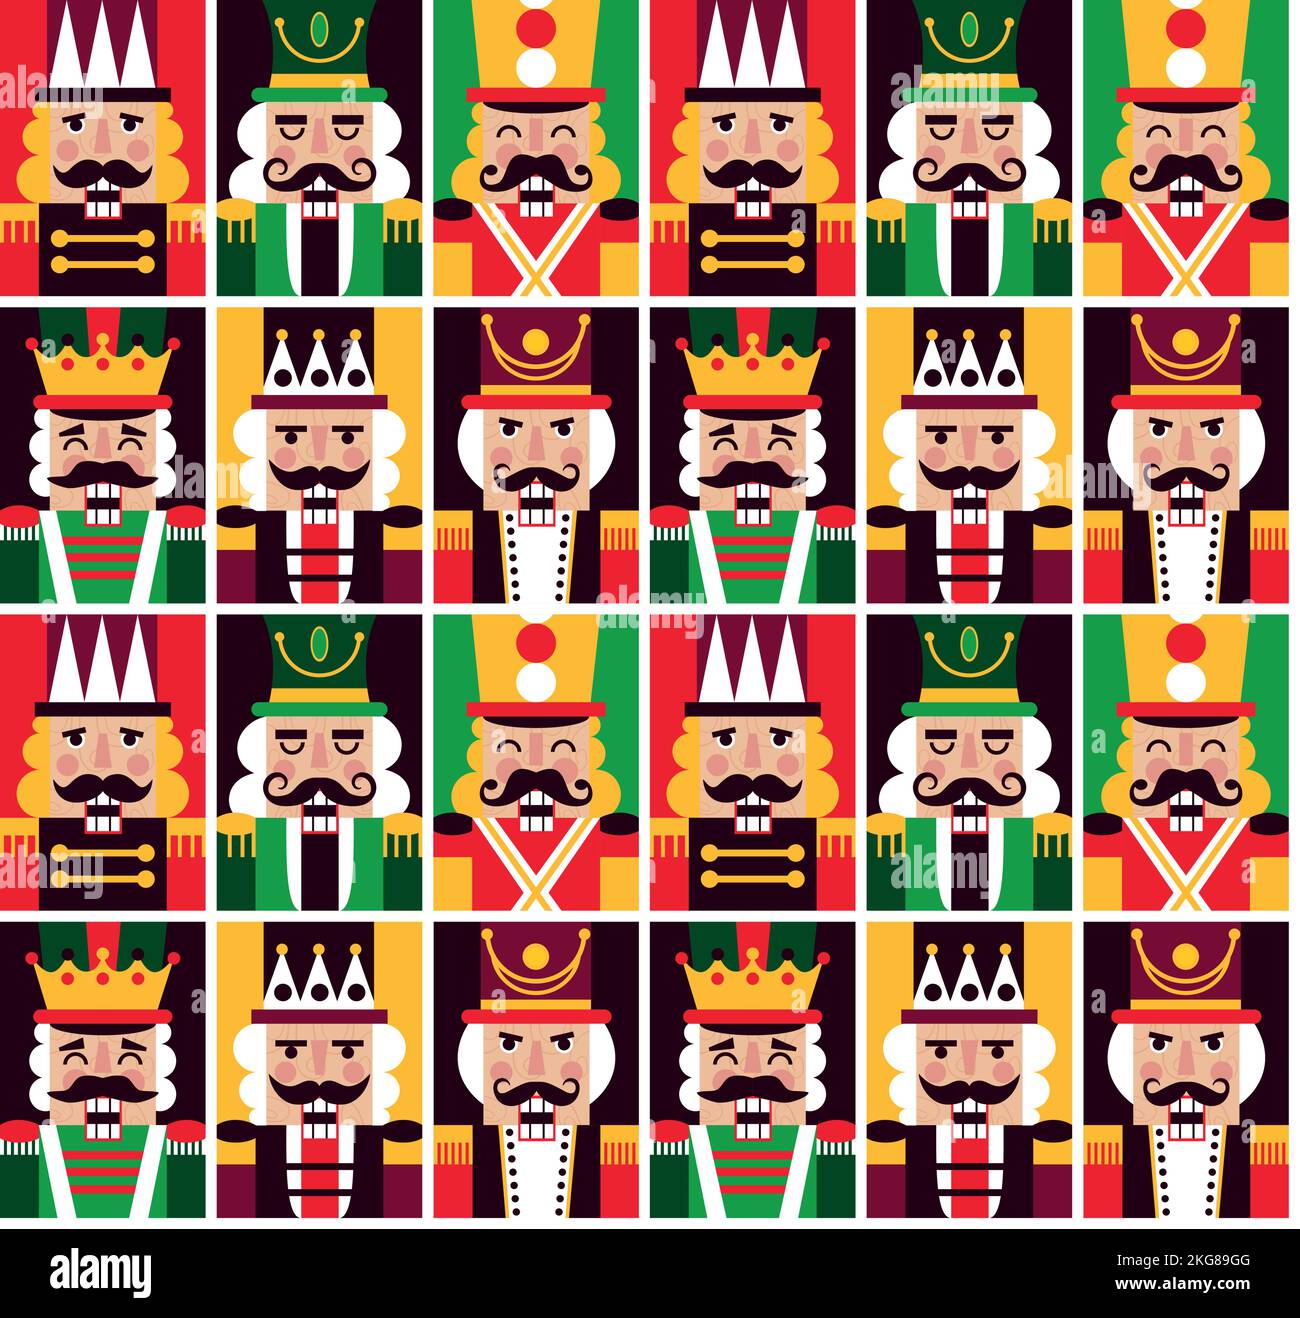 Christmas Nutcrackers Vector Illustration. Seamless new year pattern with toy soldiers. Stock Vector